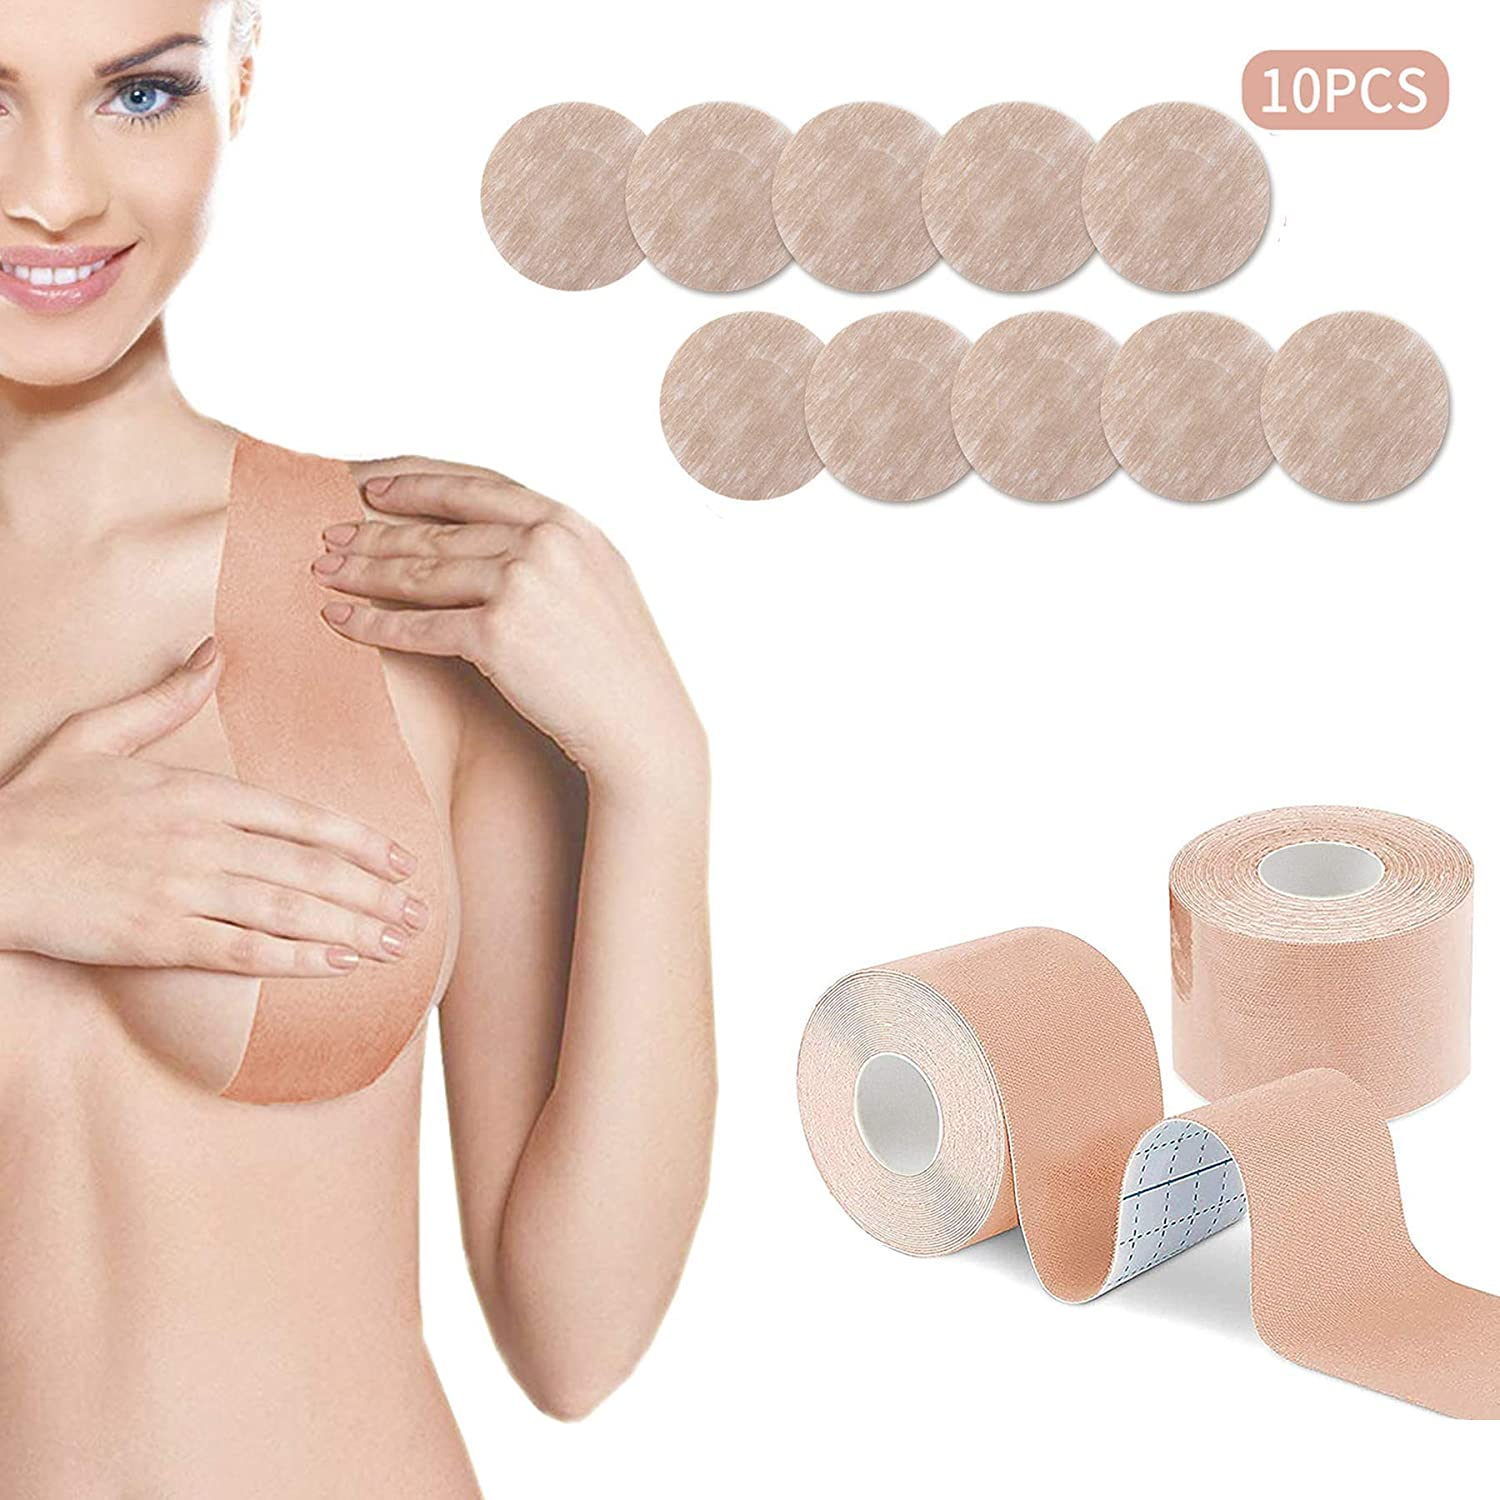 Silicone Bra Self Adhesive Push Up Strapless Invisible Pasties Cover Breast  Lift